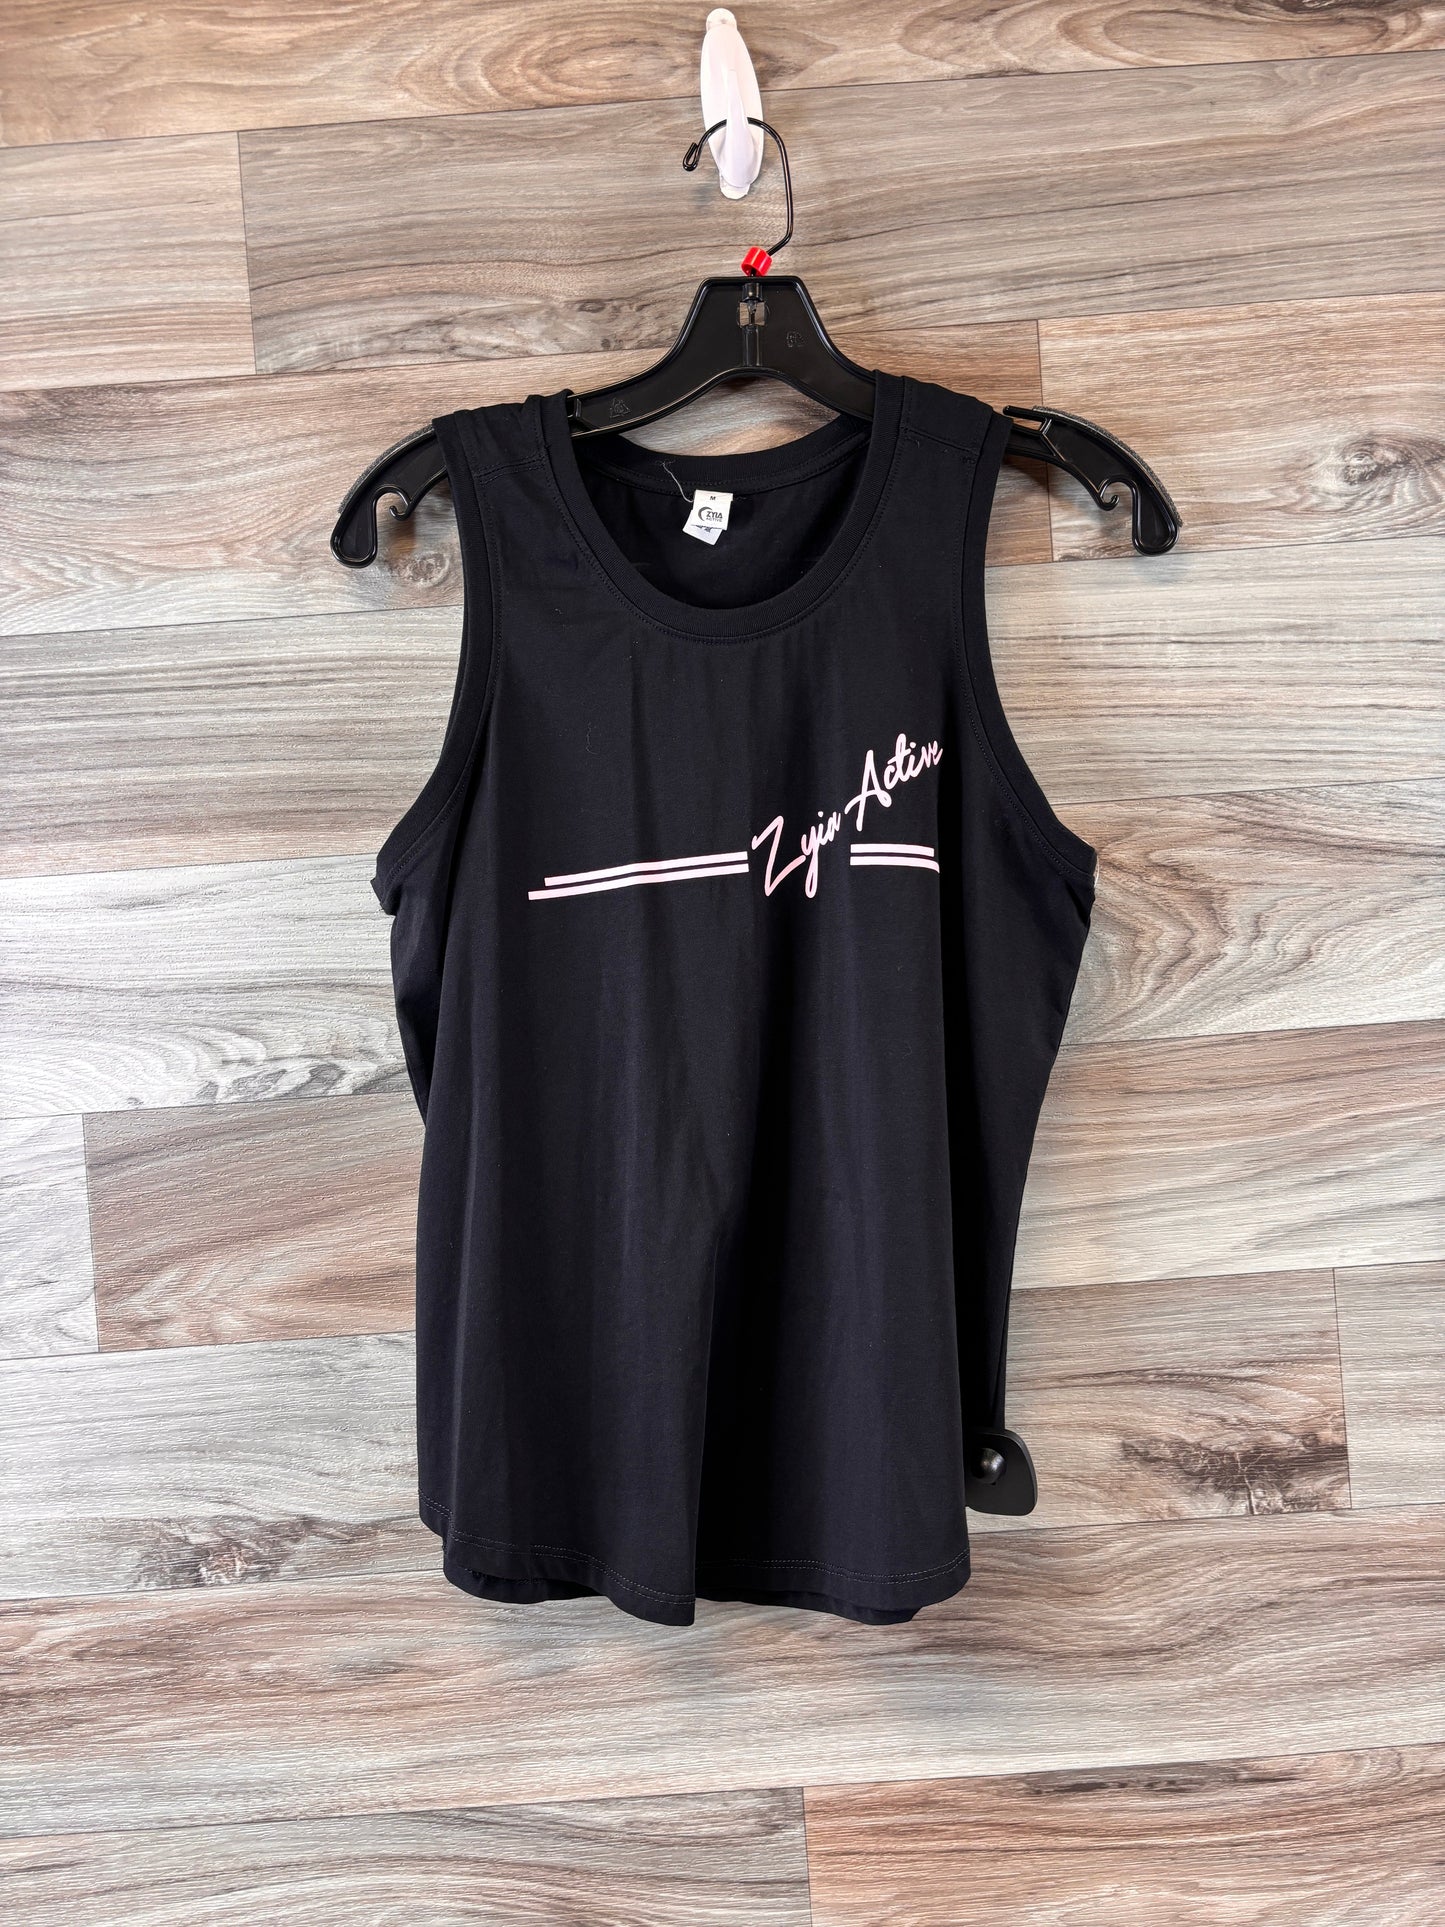 Black & Pink Athletic Tank Top Zyia, Size M